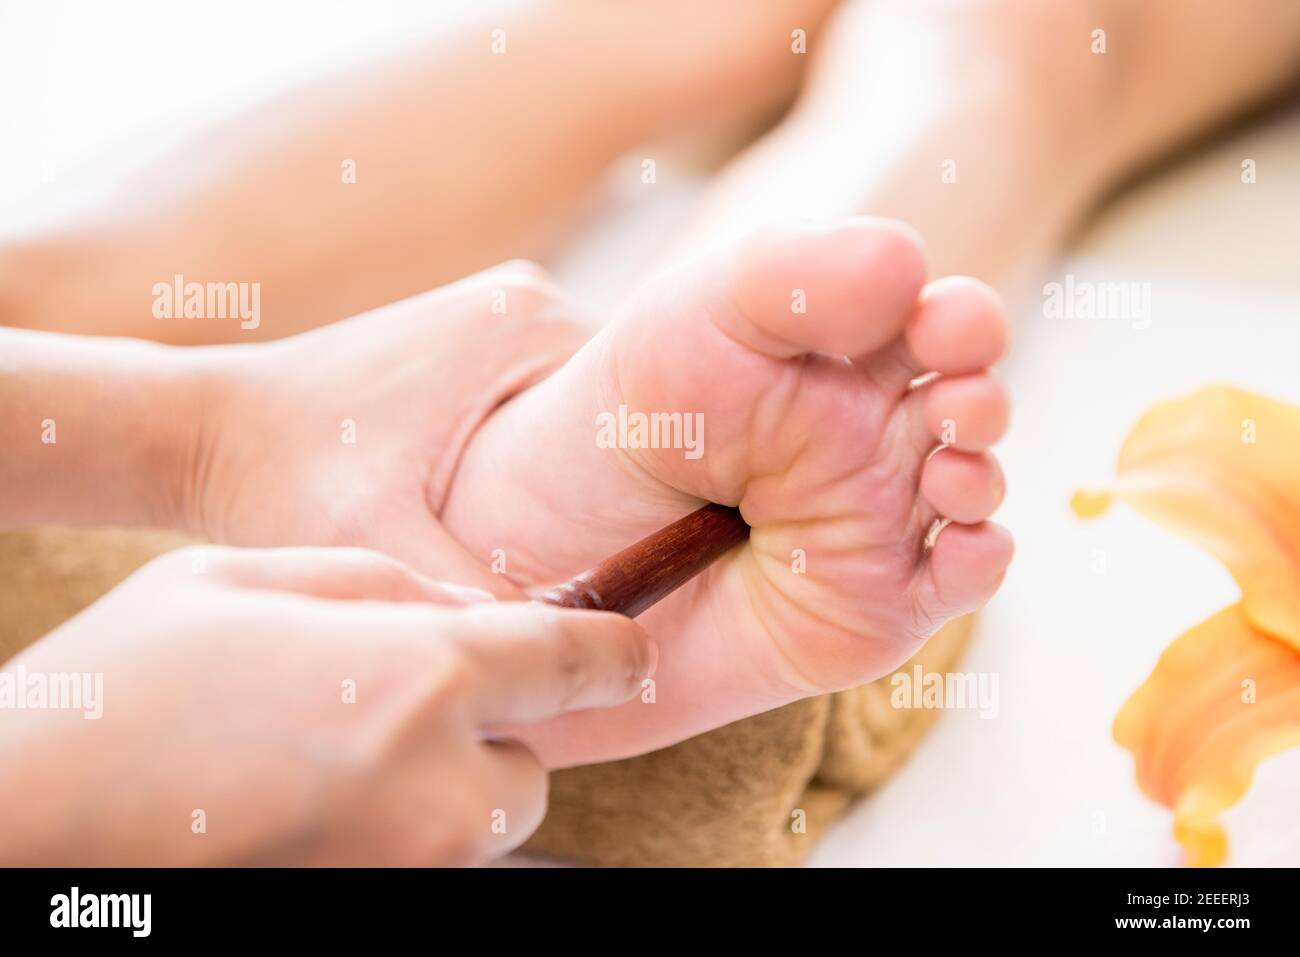 Professional therapist giving relaxing traditional thai reflexology foot massage with stick to a woman in spa Stock Photo